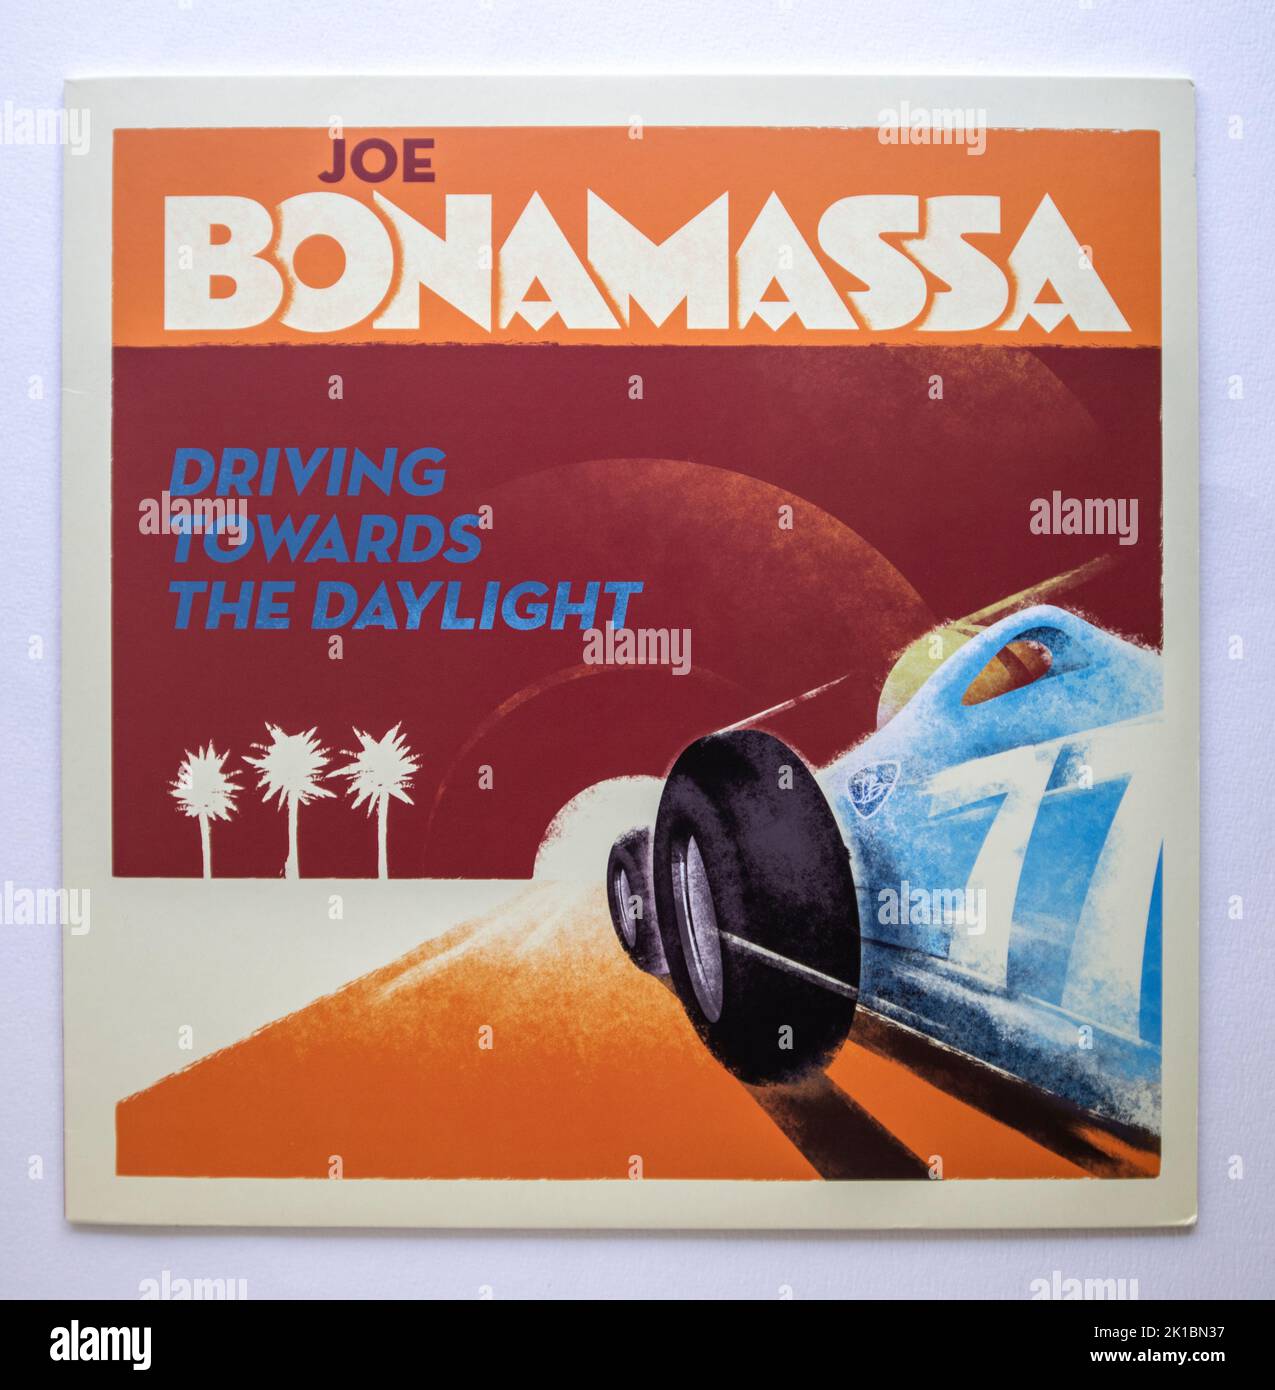 LP cover of Driving Towards the Daylight, the tenth studio album by Joe Bonamassa, which was released in 2012 Stock Photo